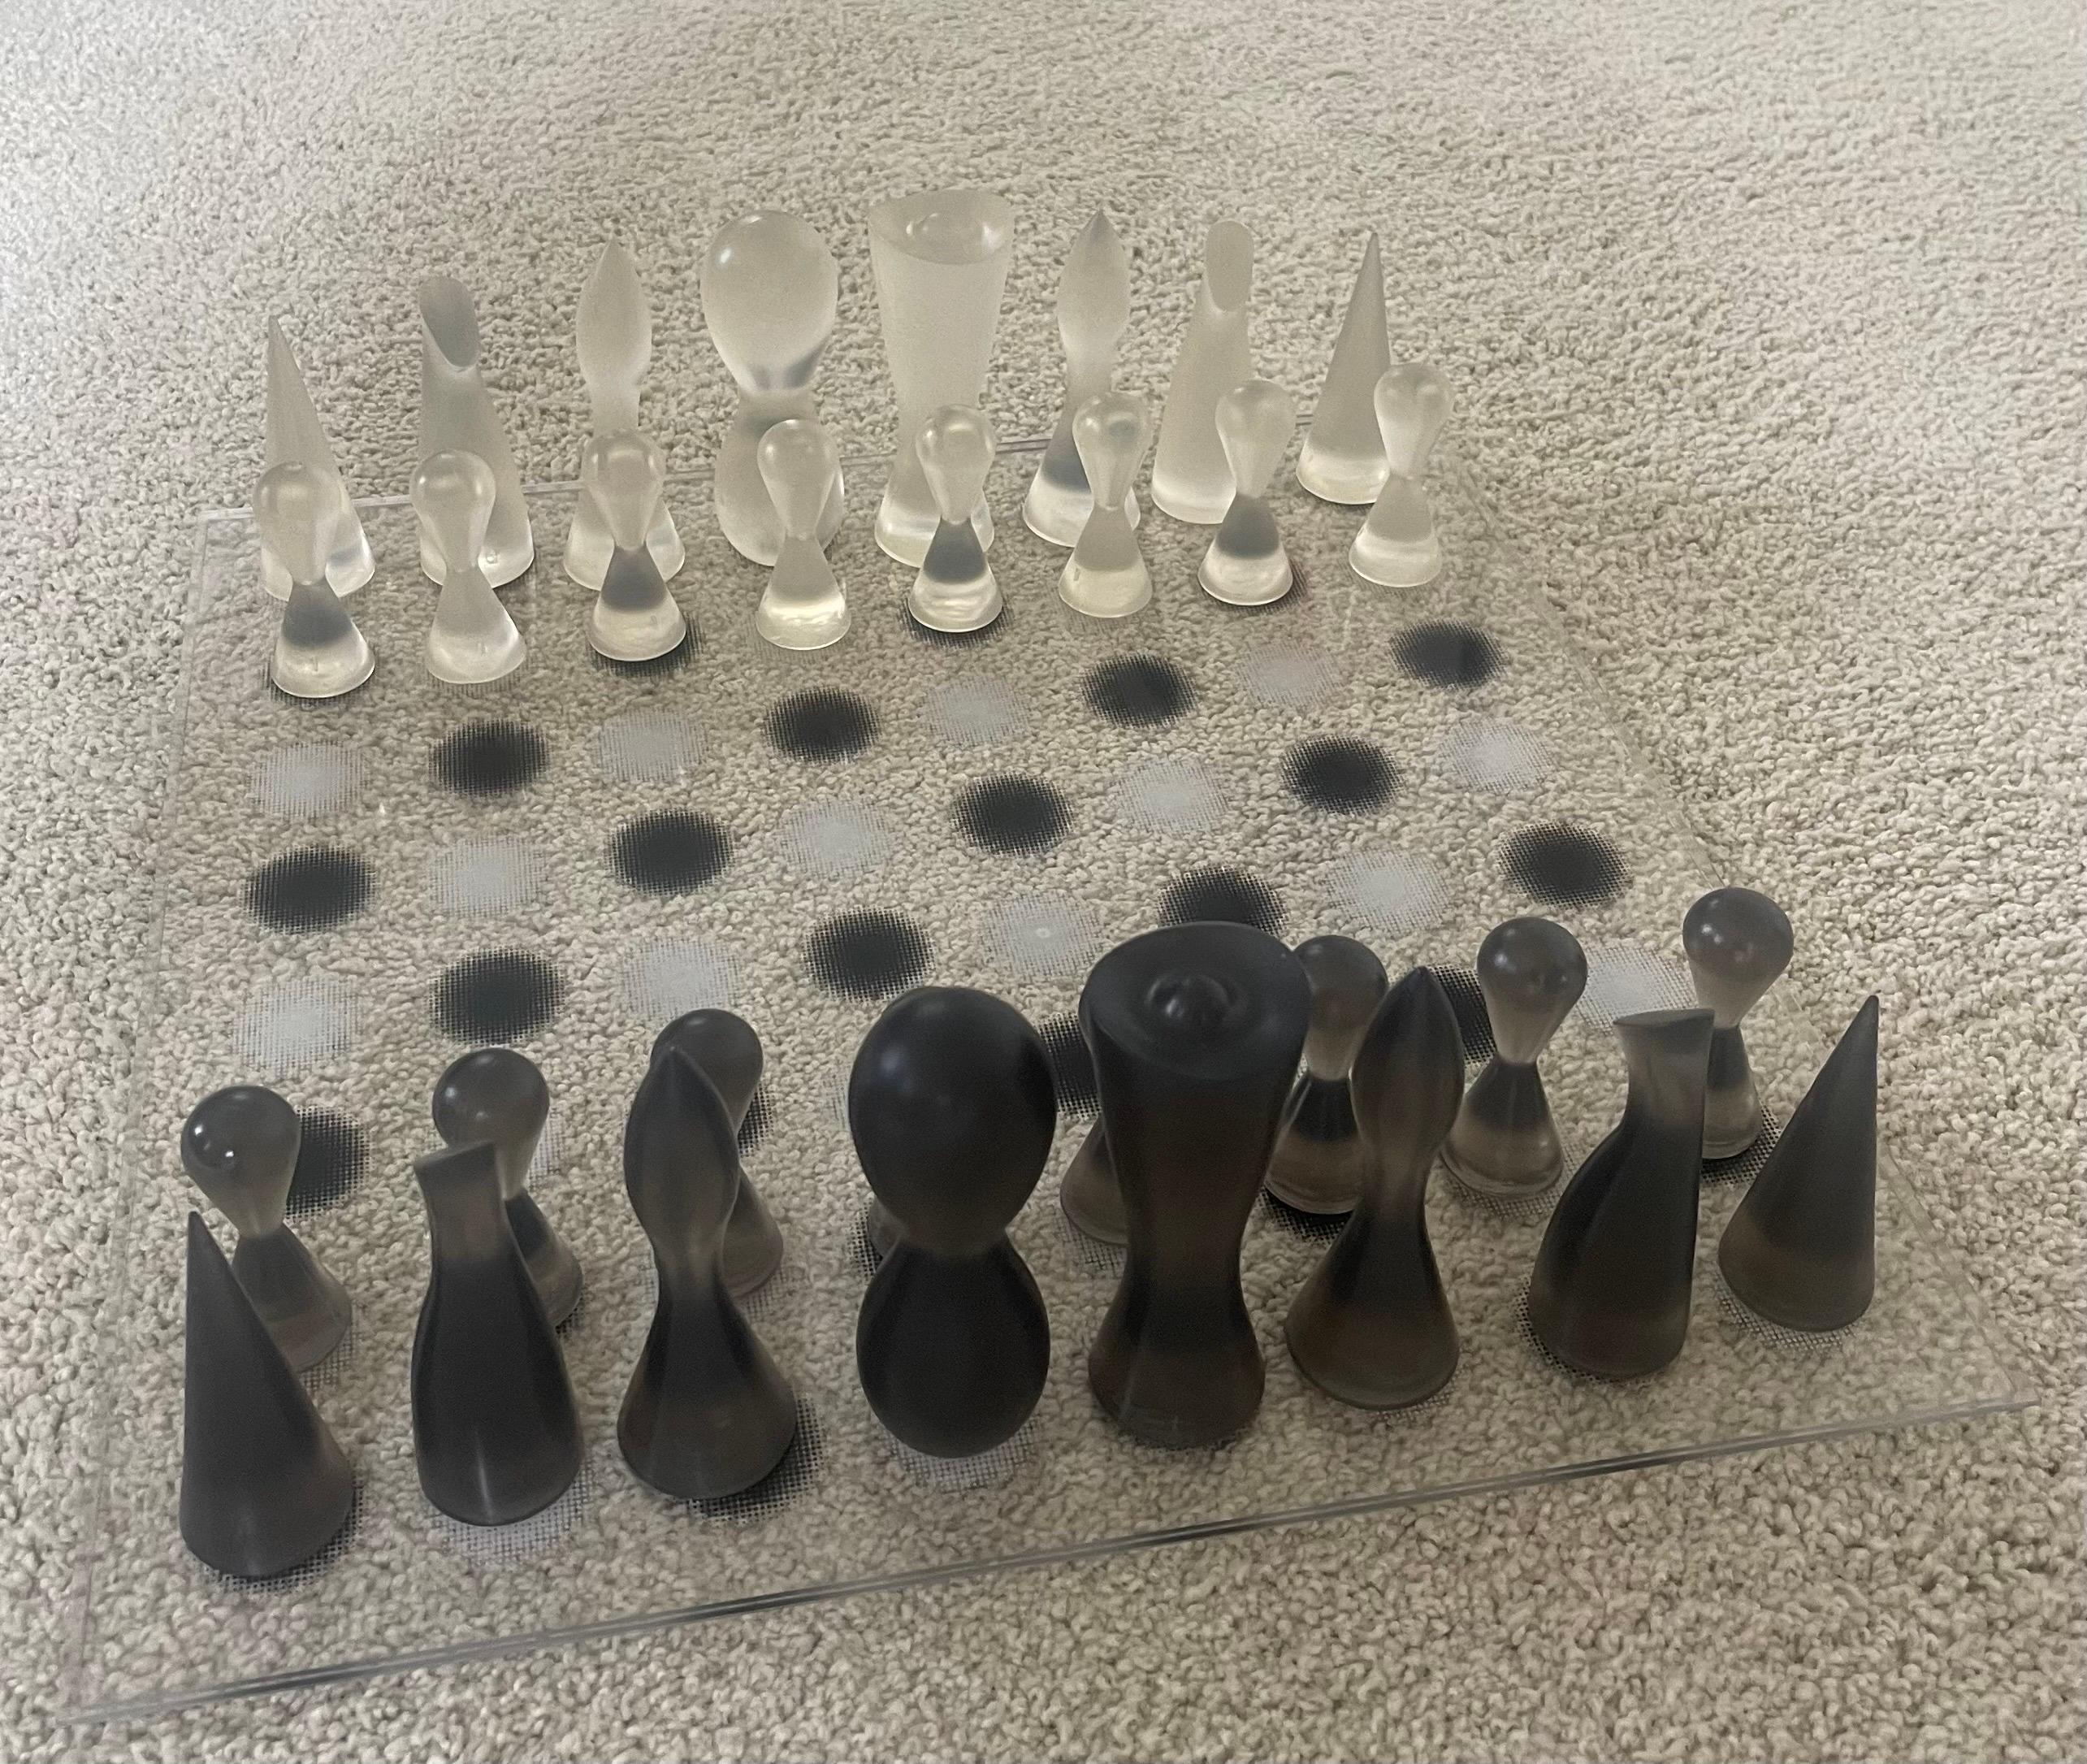 Beautiful and rare acrylic and rubber modern chess set by Karim Rashid, circa 2002. The set is in brand new condition and comes in original box with brochure. The sculptural and artistic black and clear chess set is hard to find and out of